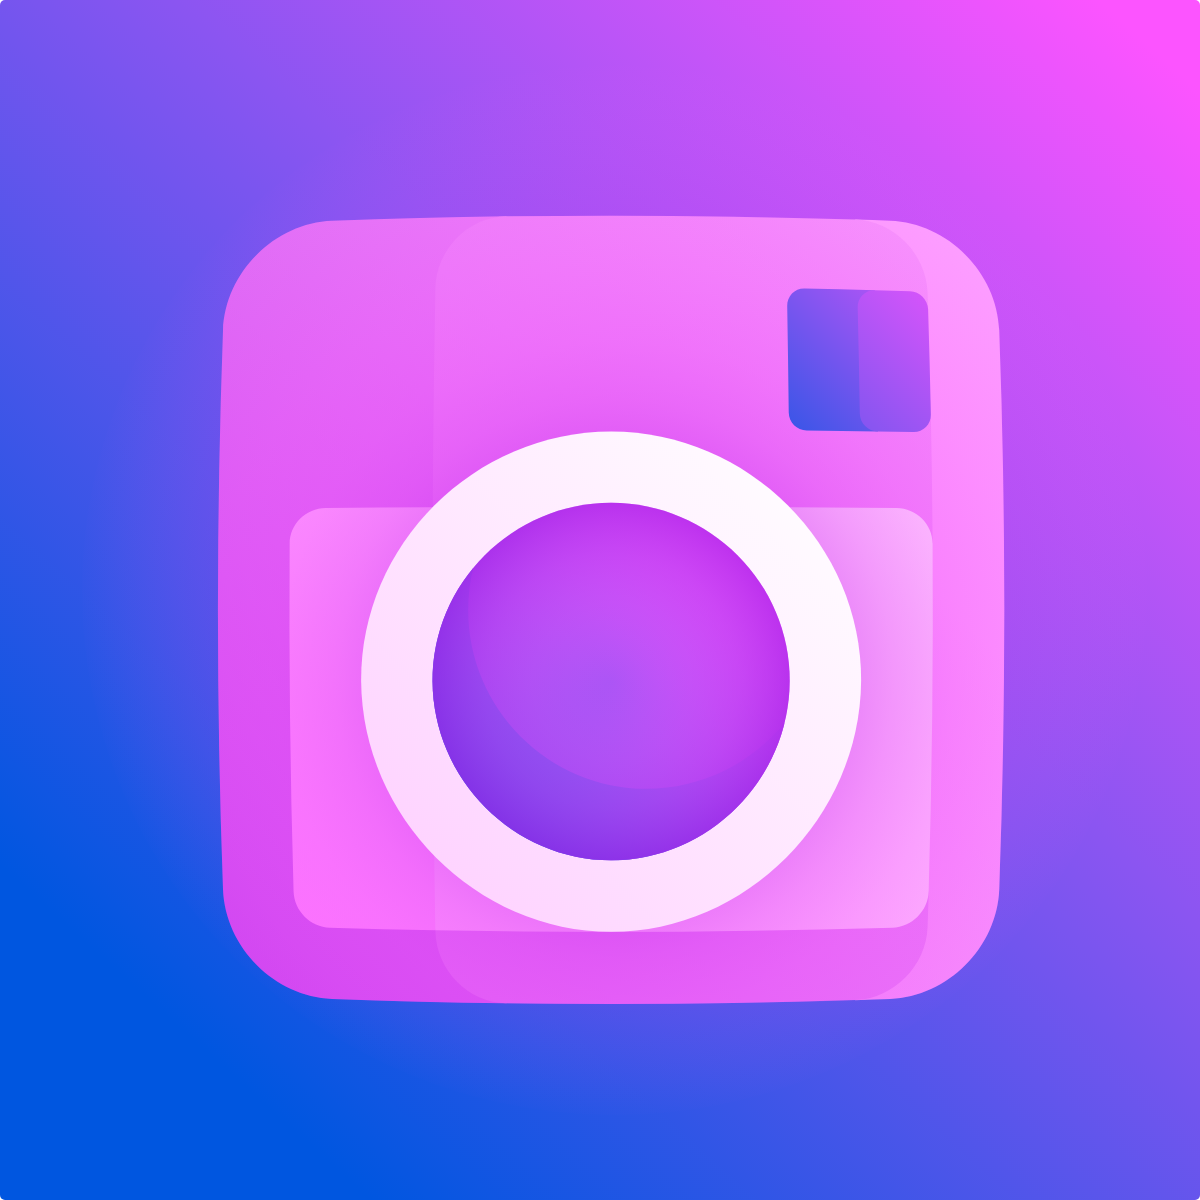 Hire Shopify Experts to integrate Instagram Shop + Feed Gallery app into a Shopify store